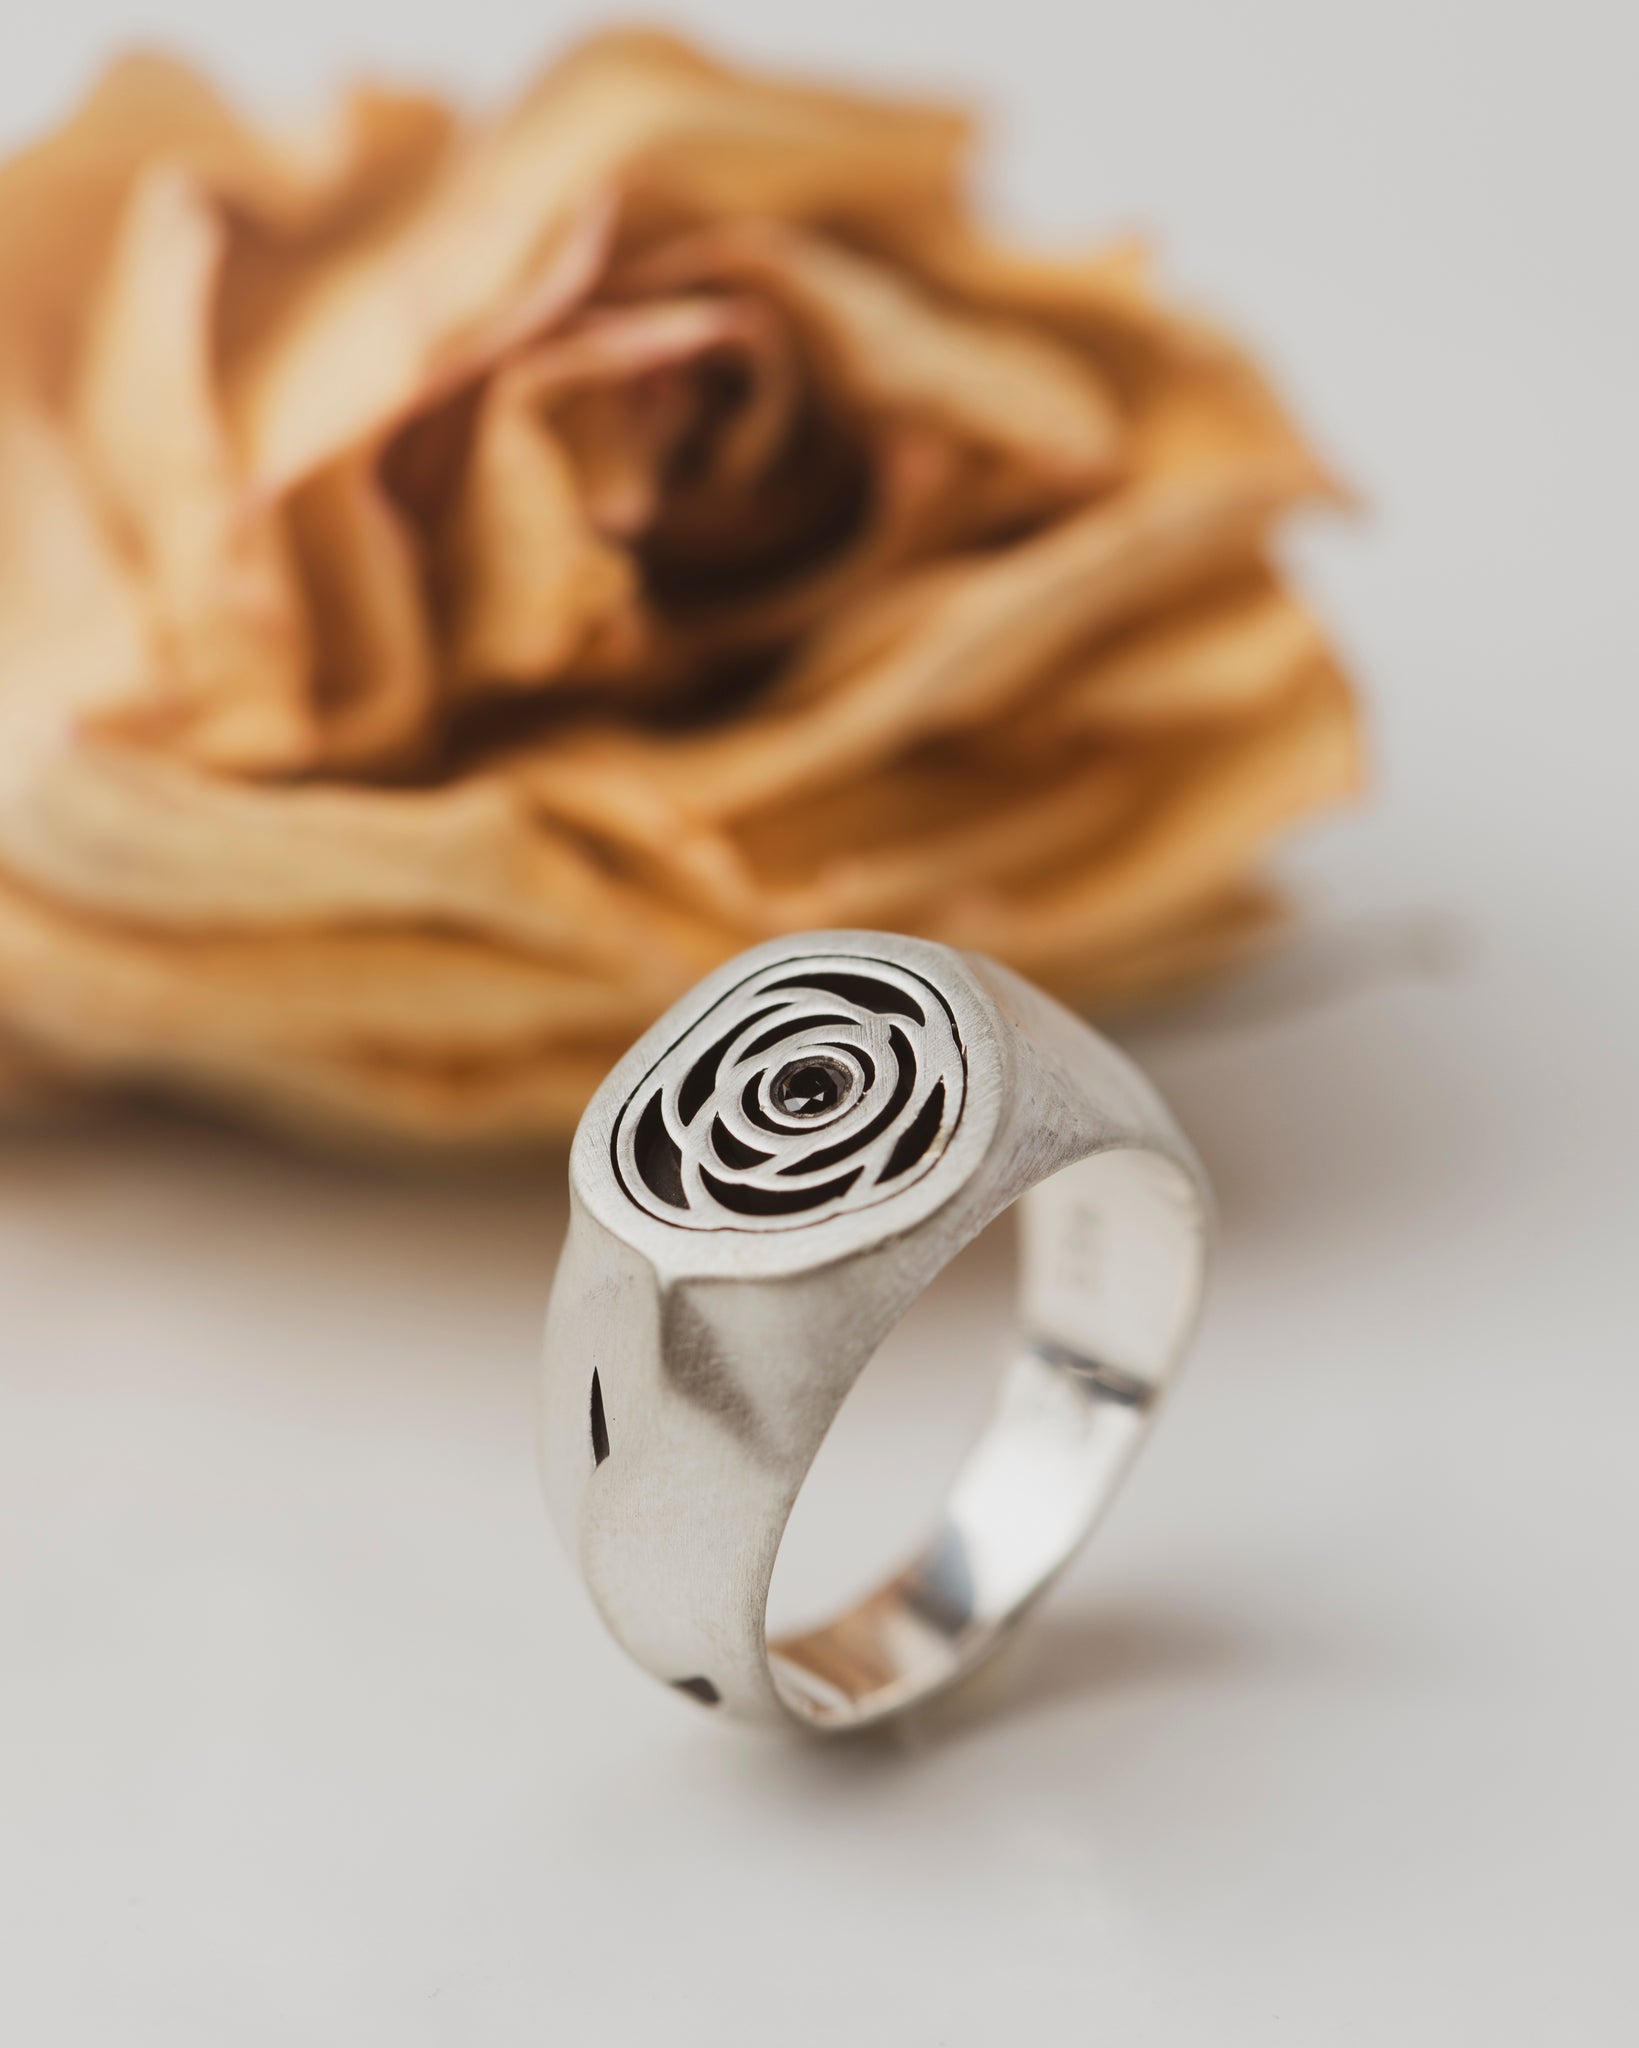 Rose Signet Ring with a Black Diamond center. The band has asymmetric shaping, giving it an organic feel. It even has thorns--where portions of the metal have been carved and oxidized.